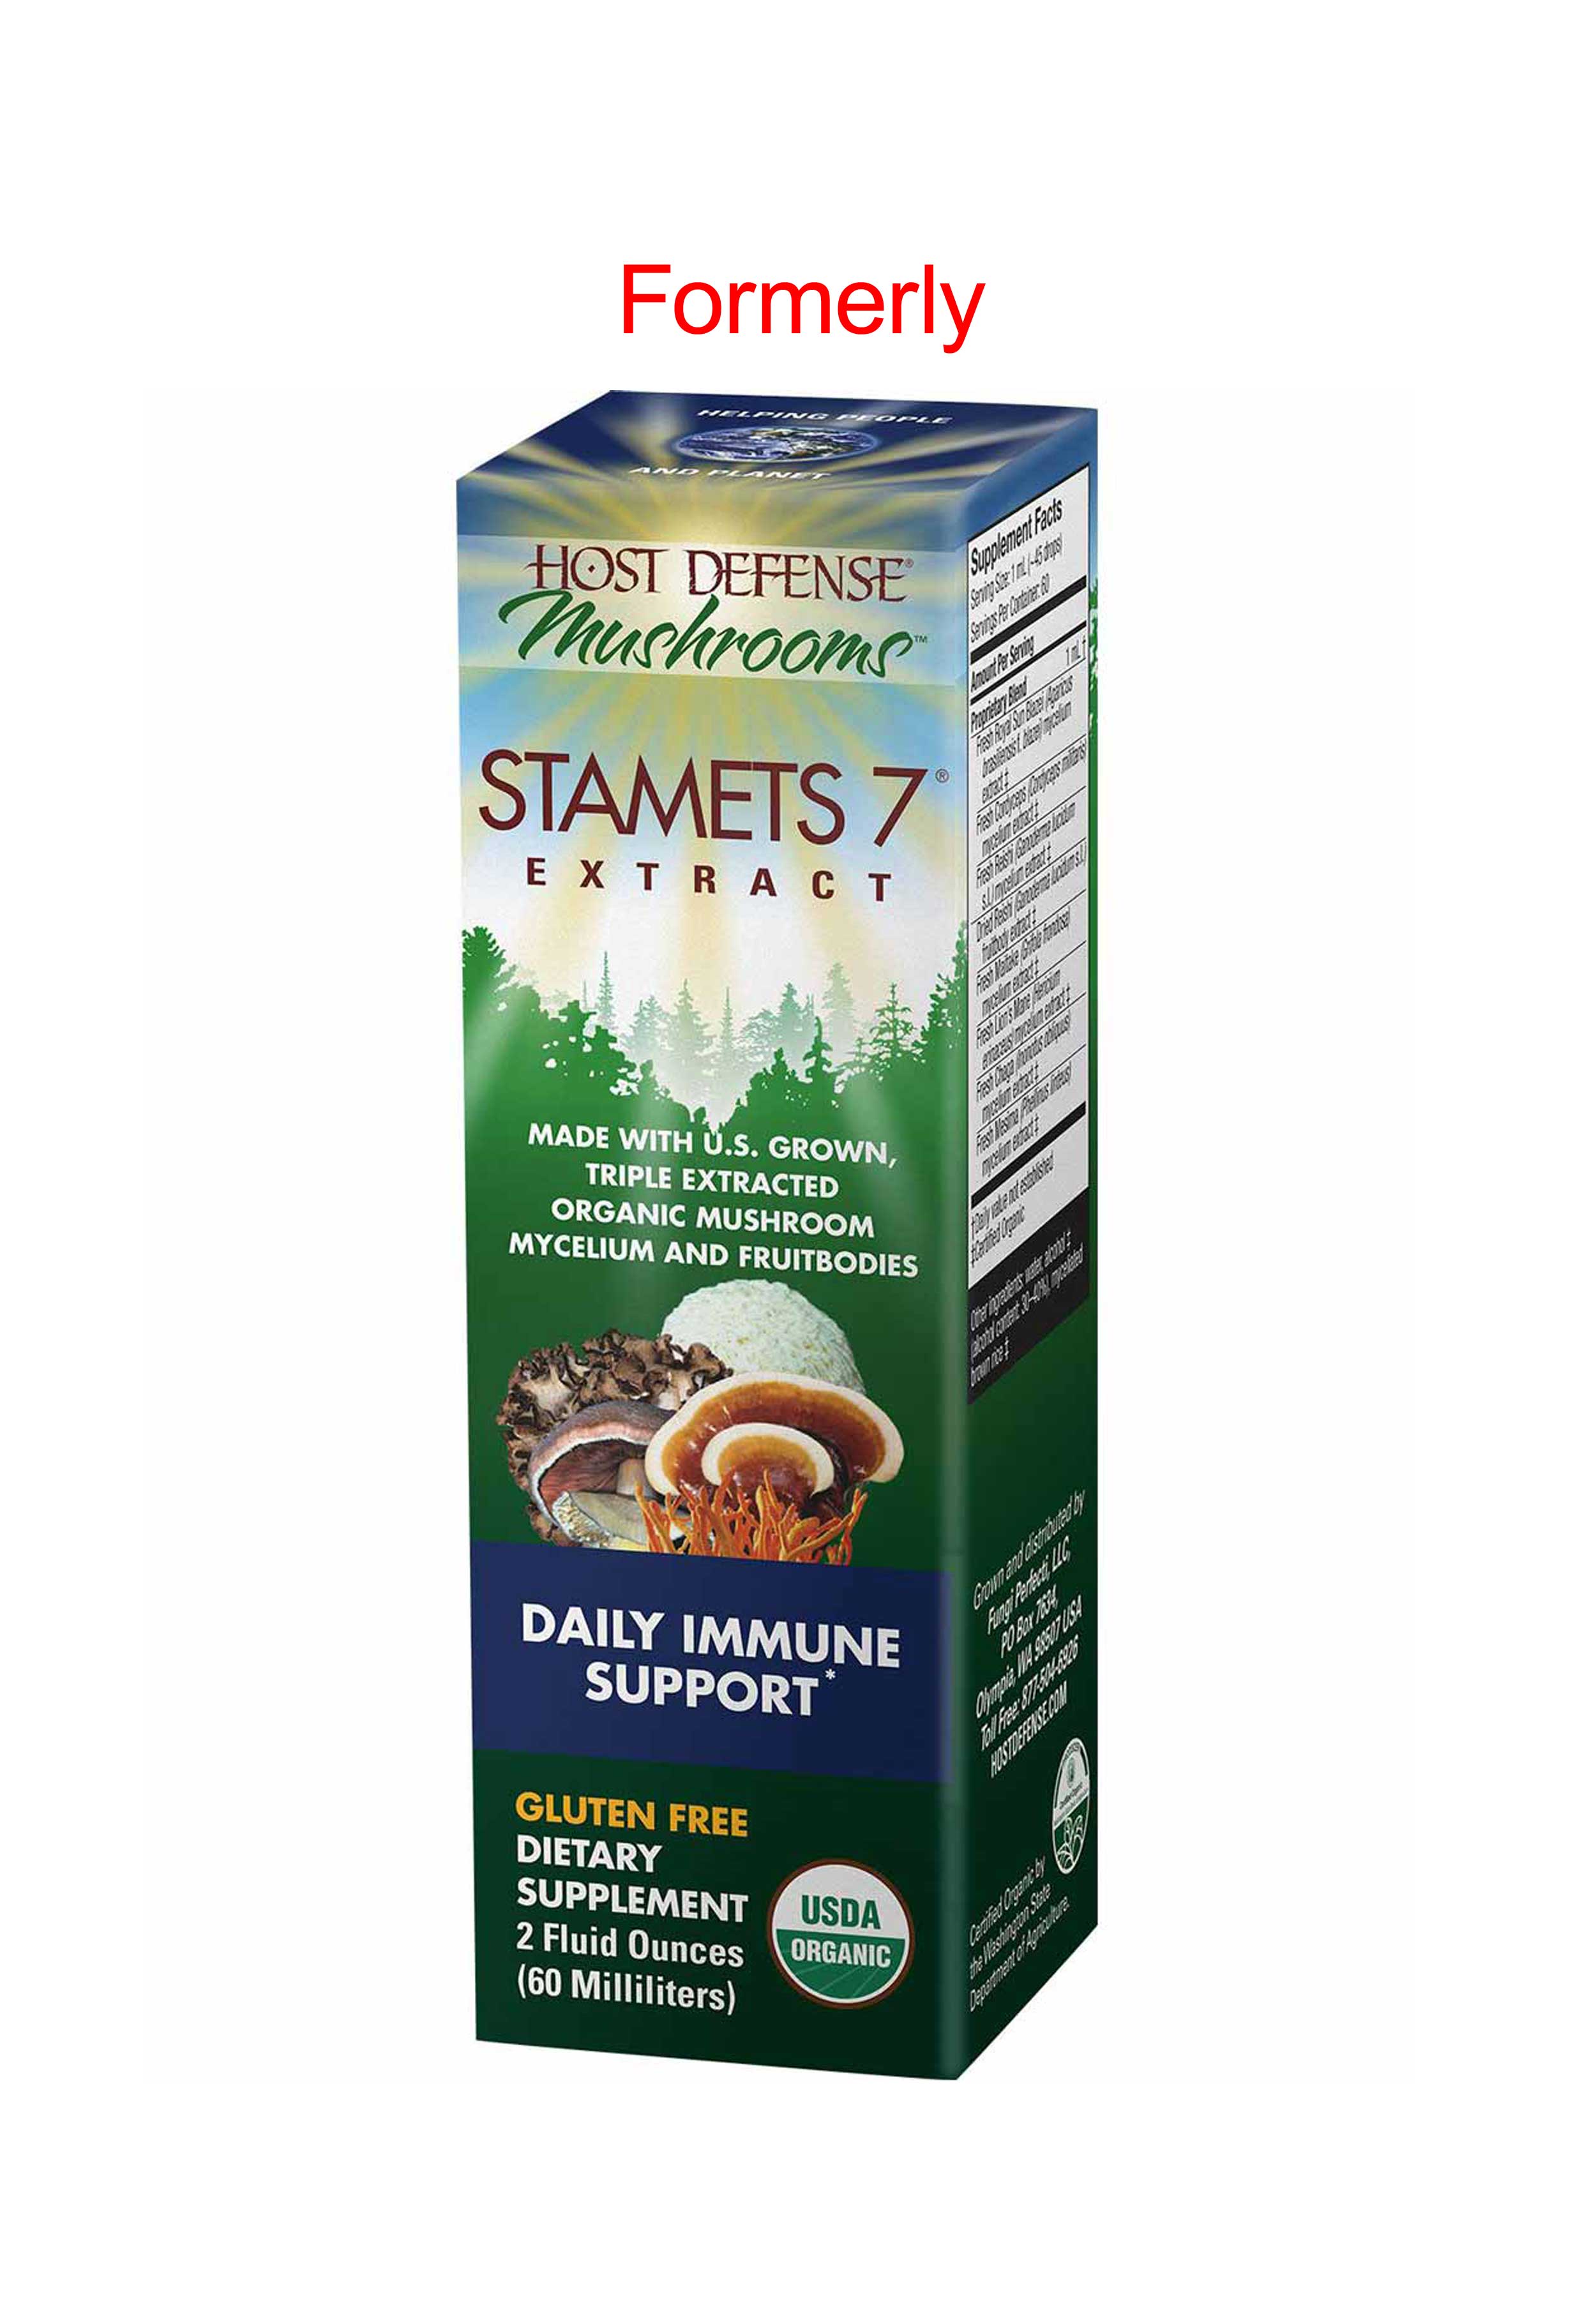 Host Defense Stamets 7® Extract Formerly